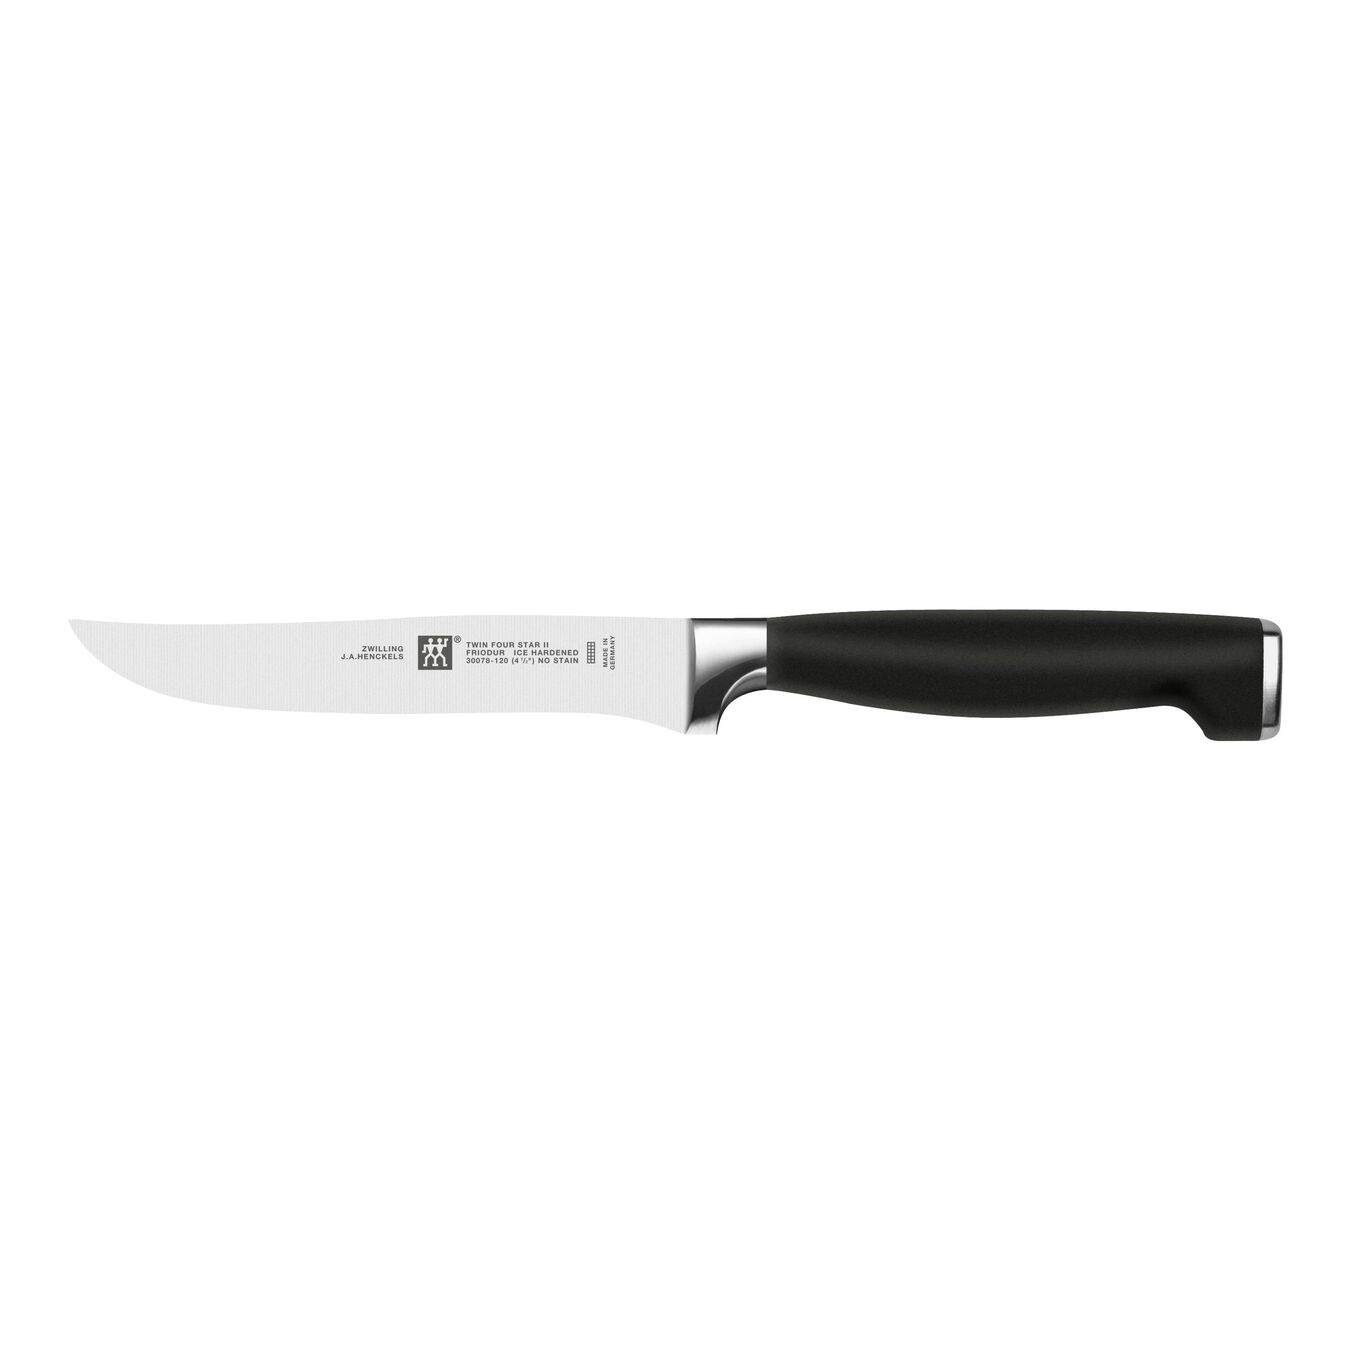 4.5-inch, Steak knife - Visual Imperfections,,large 1